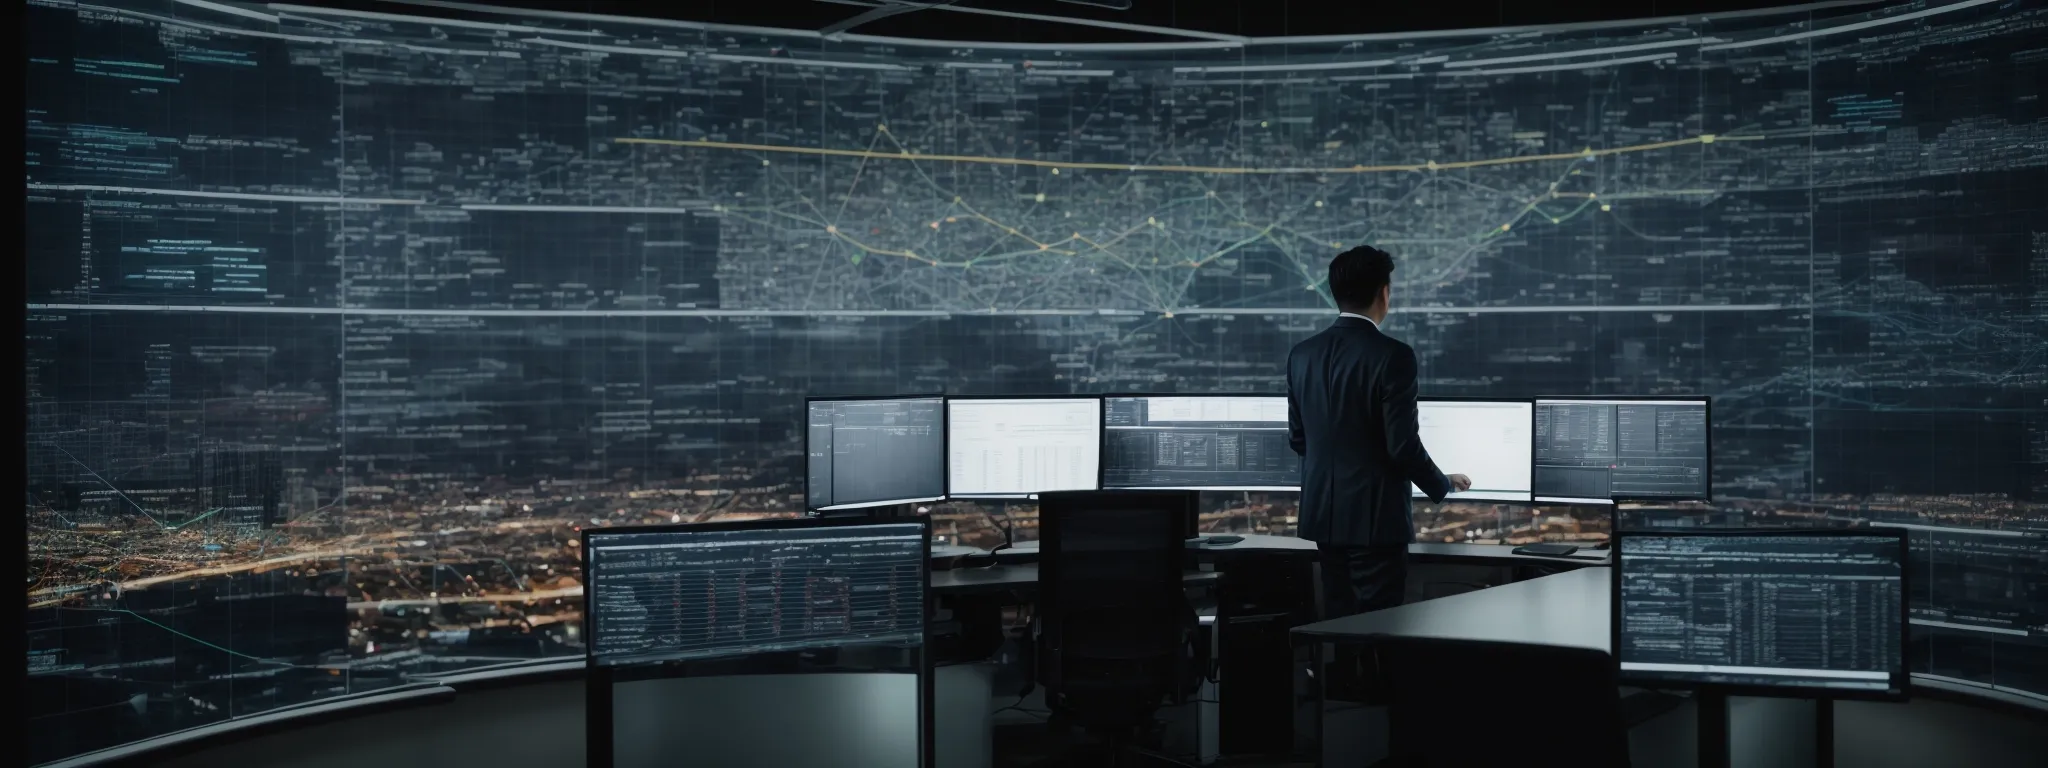 a modern office environment with an seo specialist analyzing data on a large screen displaying a complex web structure representing interconnected topics.